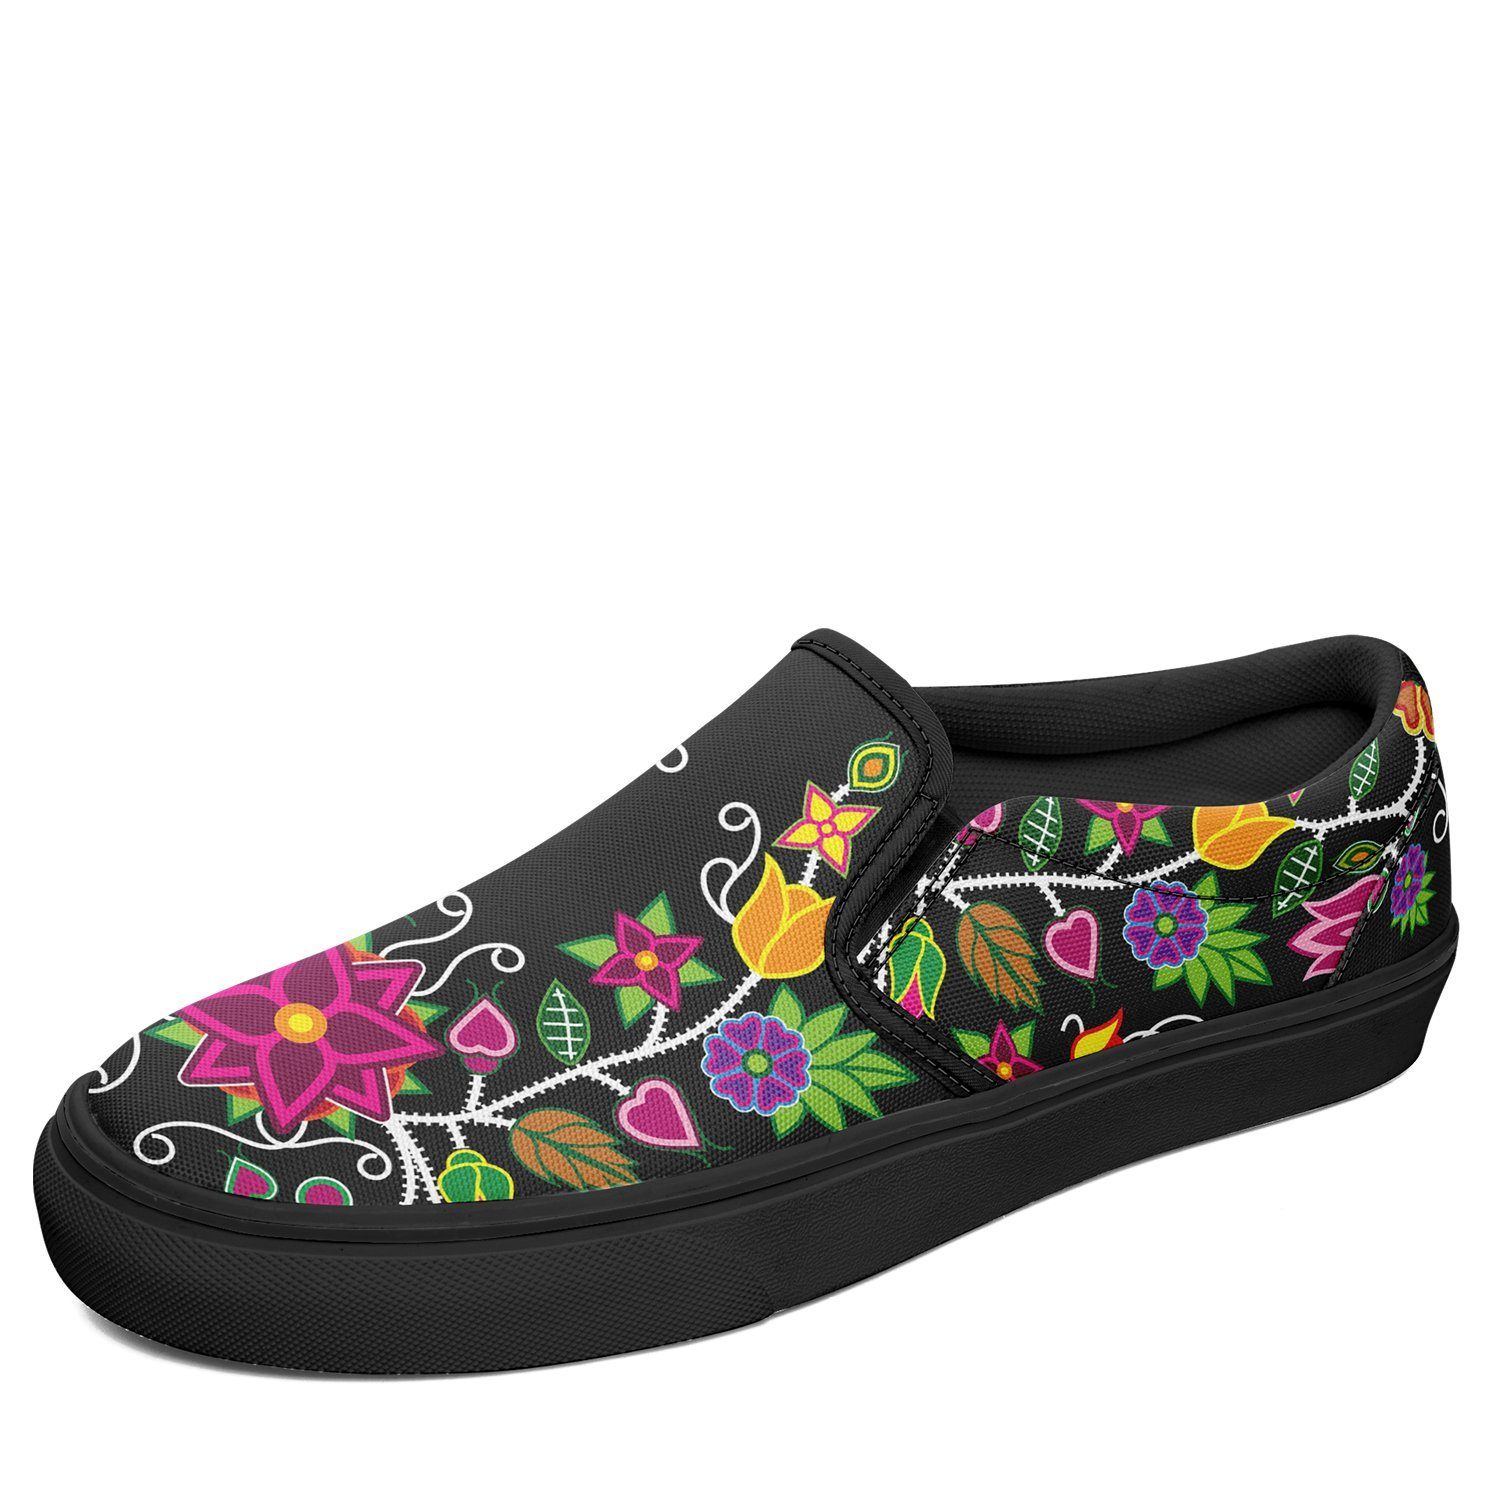 Floral Beadwork Otoyimm Kid's Canvas Slip On Shoes 49 Dzine US Youth 1 / EUR 32 Black Sole 